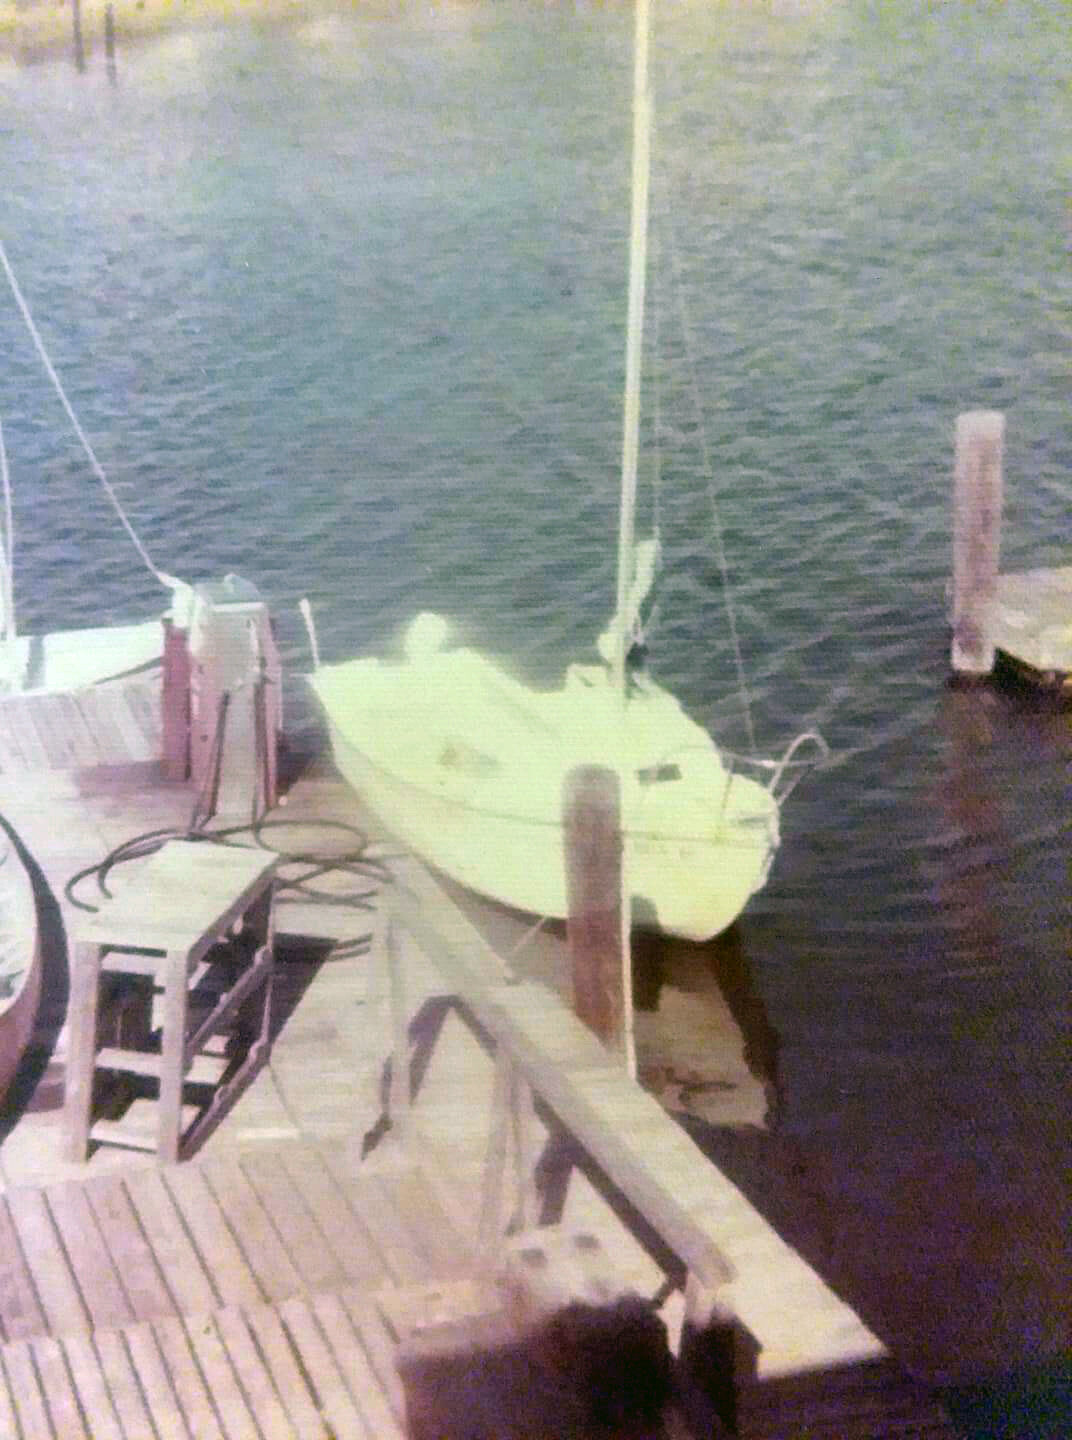 Toot-Toot: Dick Morgan’s 14-foot boat that he sailed to Key West.